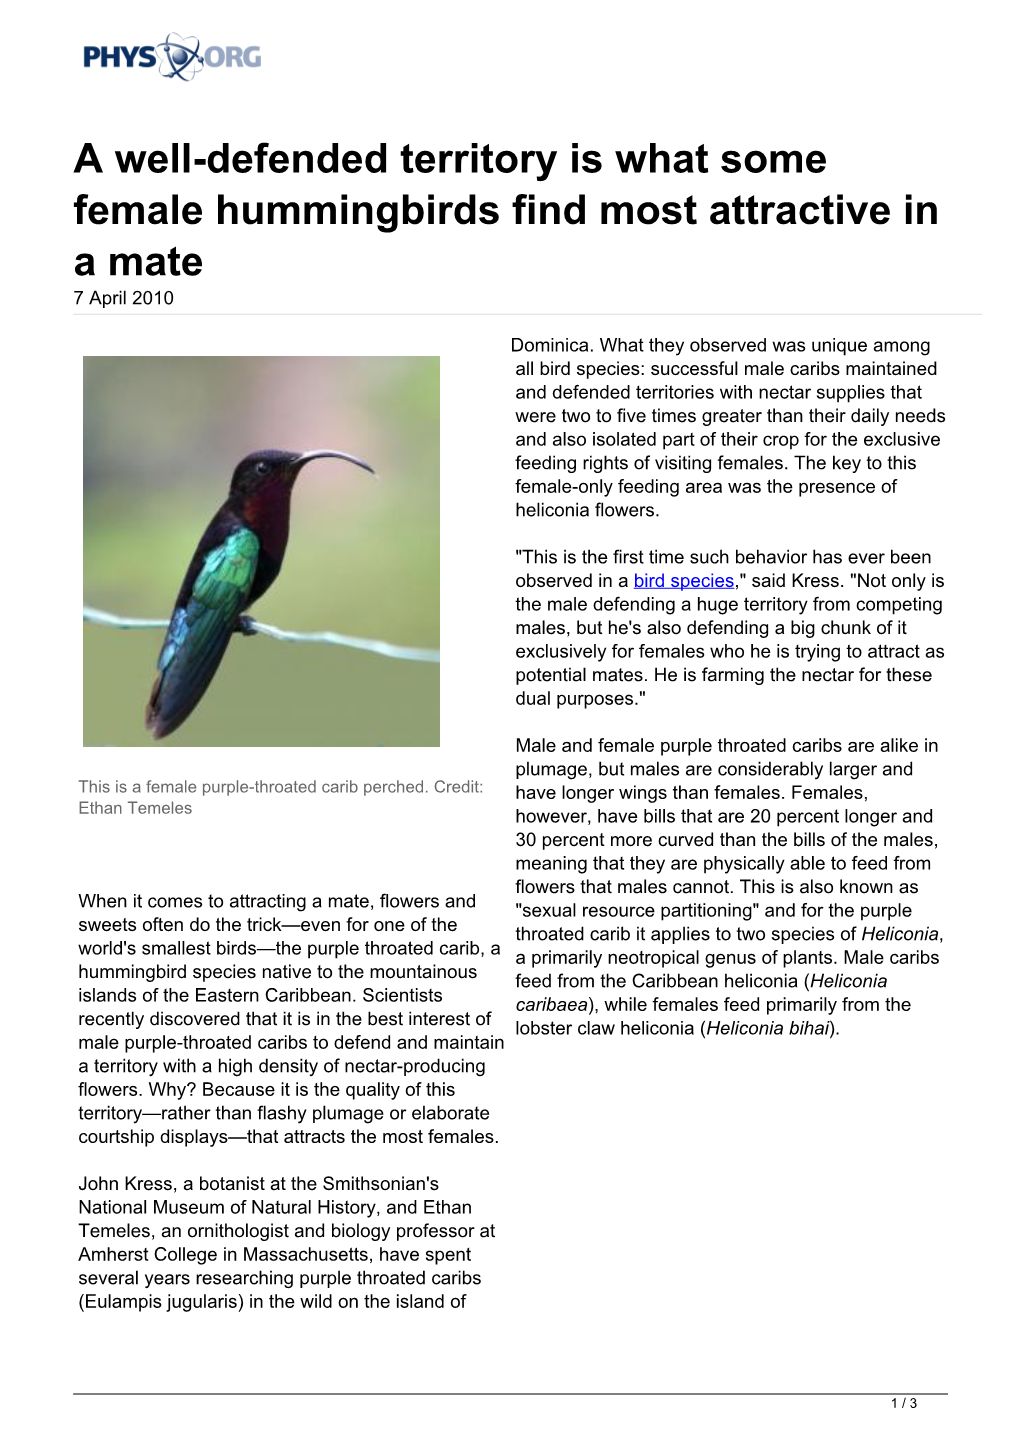 A Well-Defended Territory Is What Some Female Hummingbirds Find Most Attractive in a Mate 7 April 2010